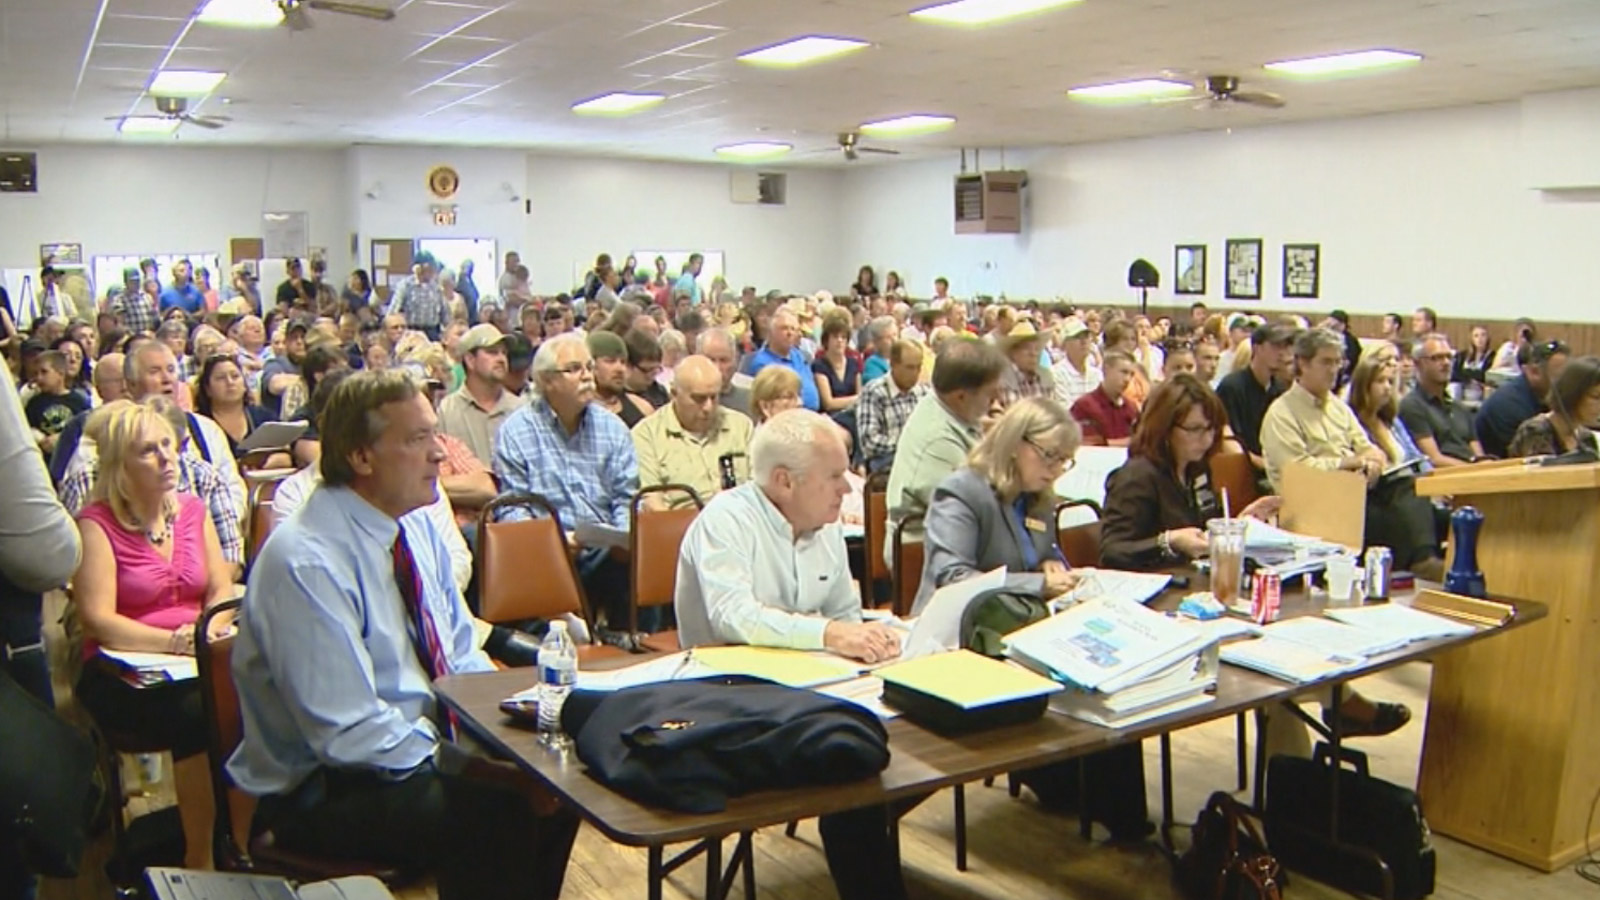 Hundreds packed a meeting to discuss Riot Fest  near Byers (credit: CBS)